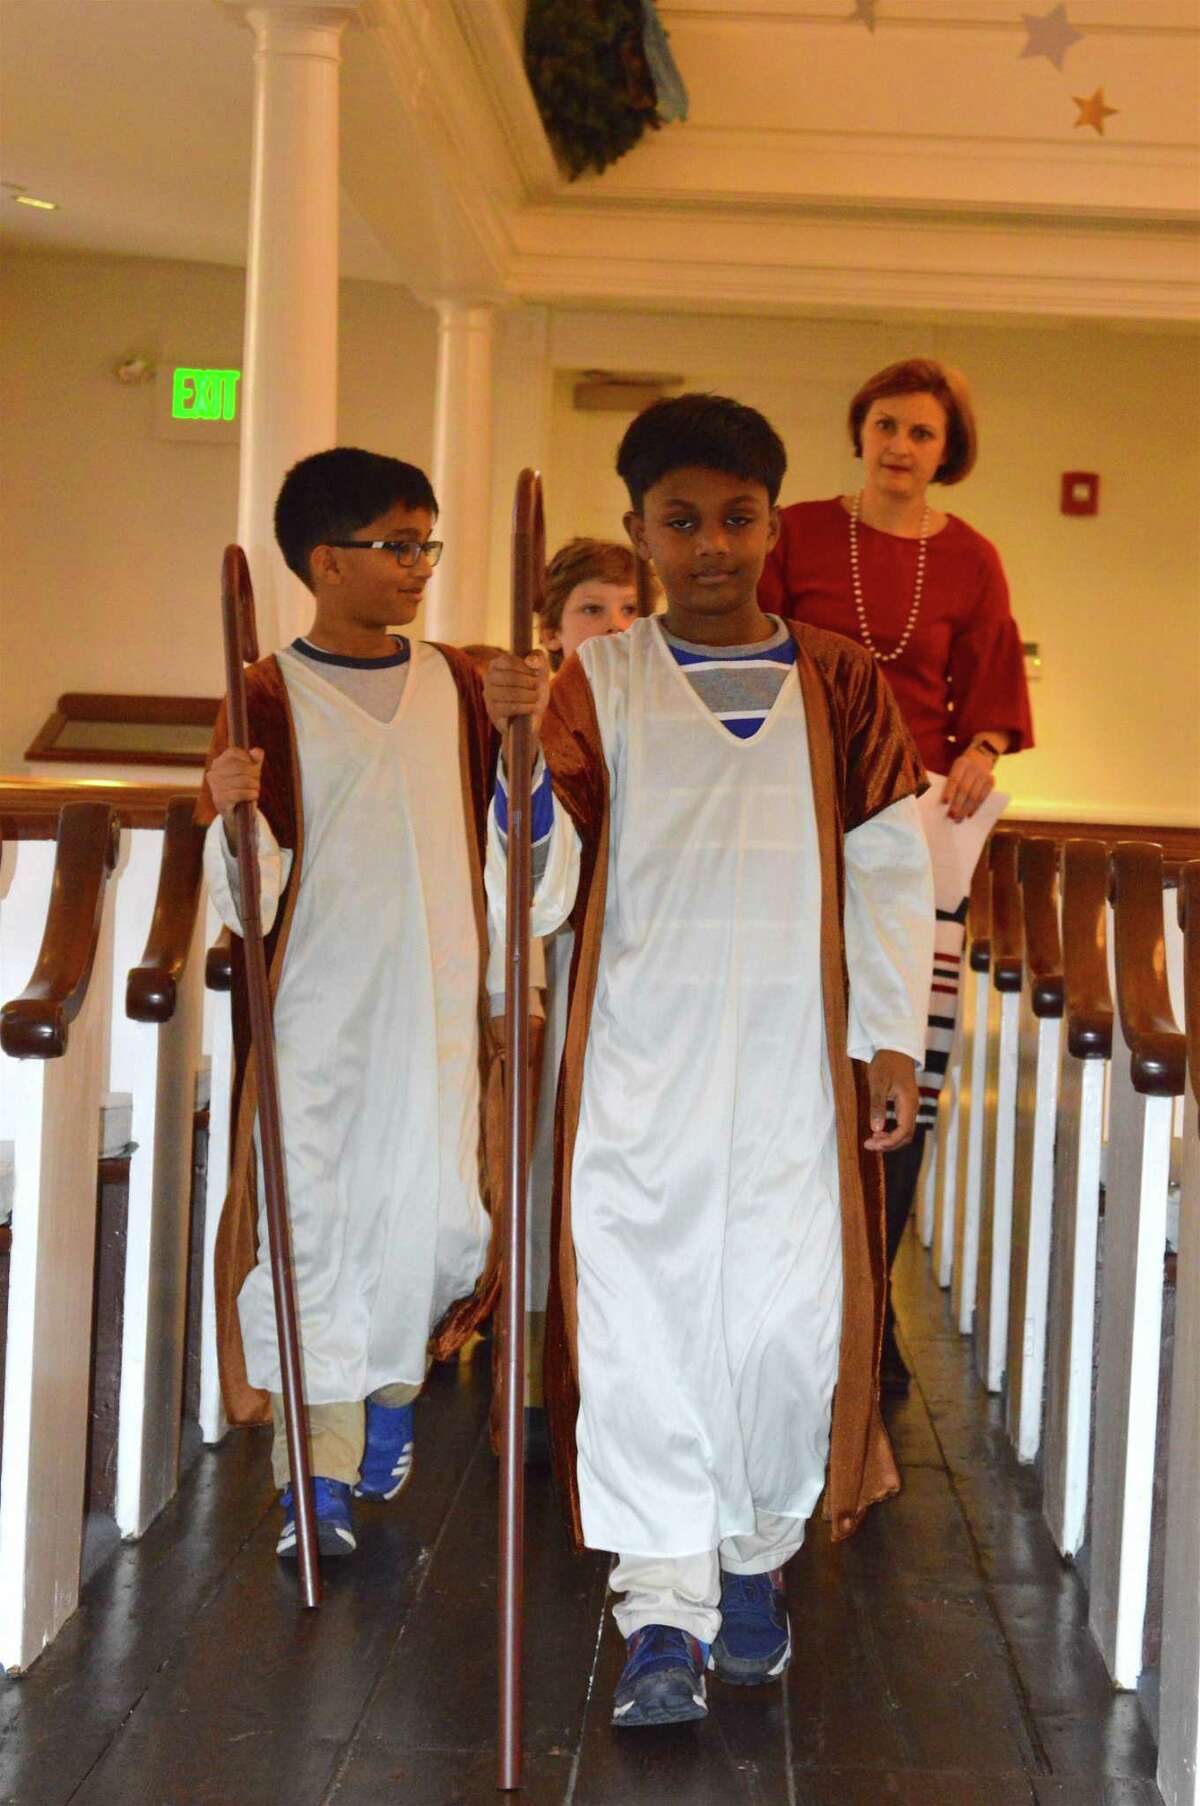 Anit Arvind, 8, of Westport, left, and his twin brother Akil lead the procession of shepherds at the rehearsal for the annual Christmas Eve Pageant at Saugatuck Congregational Church, Sunday, Dec. 24, 2017, in Westport, Conn.